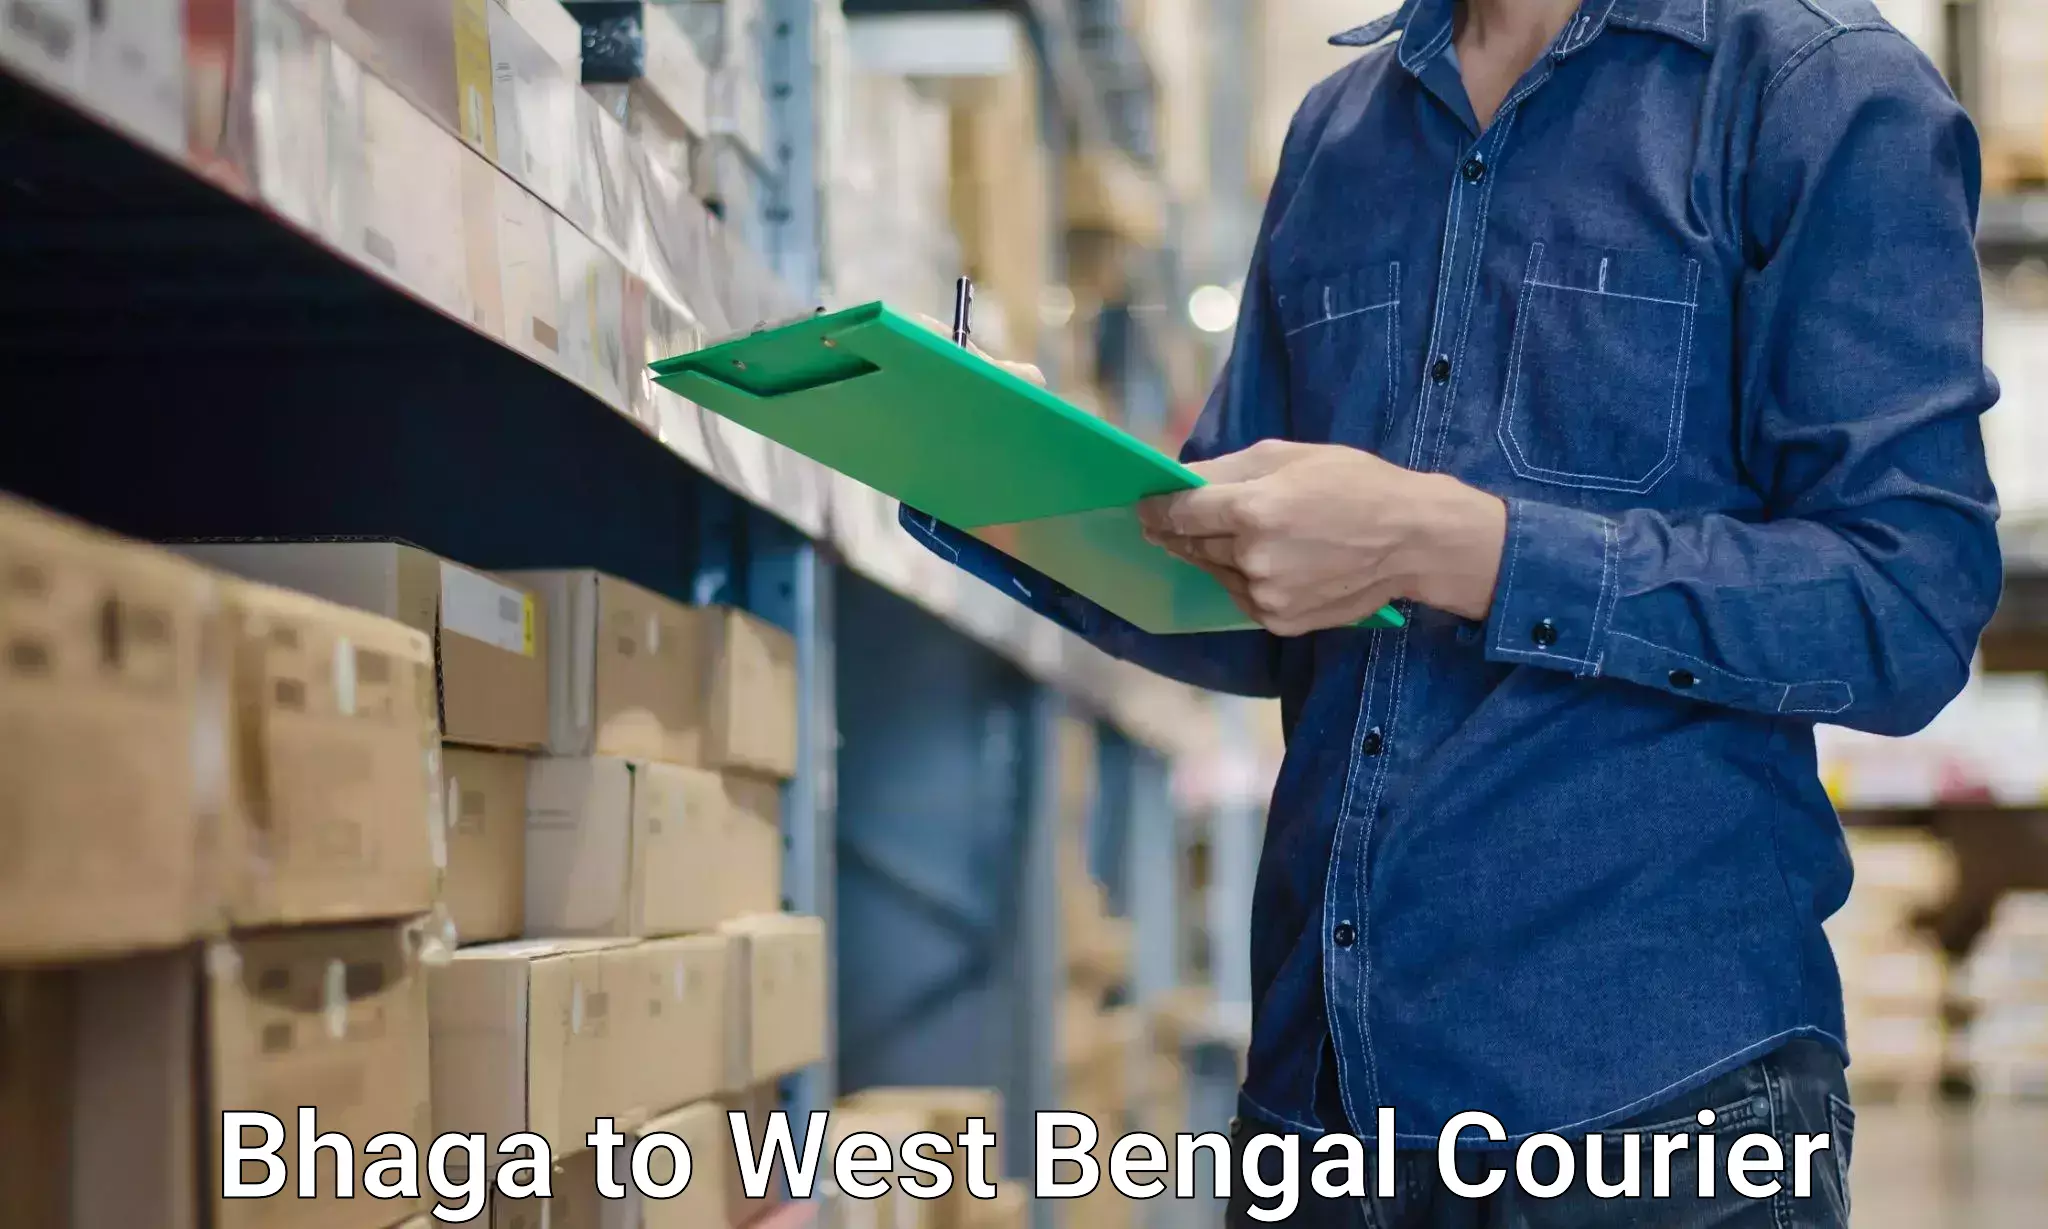 Professional moving company Bhaga to Tollygunge